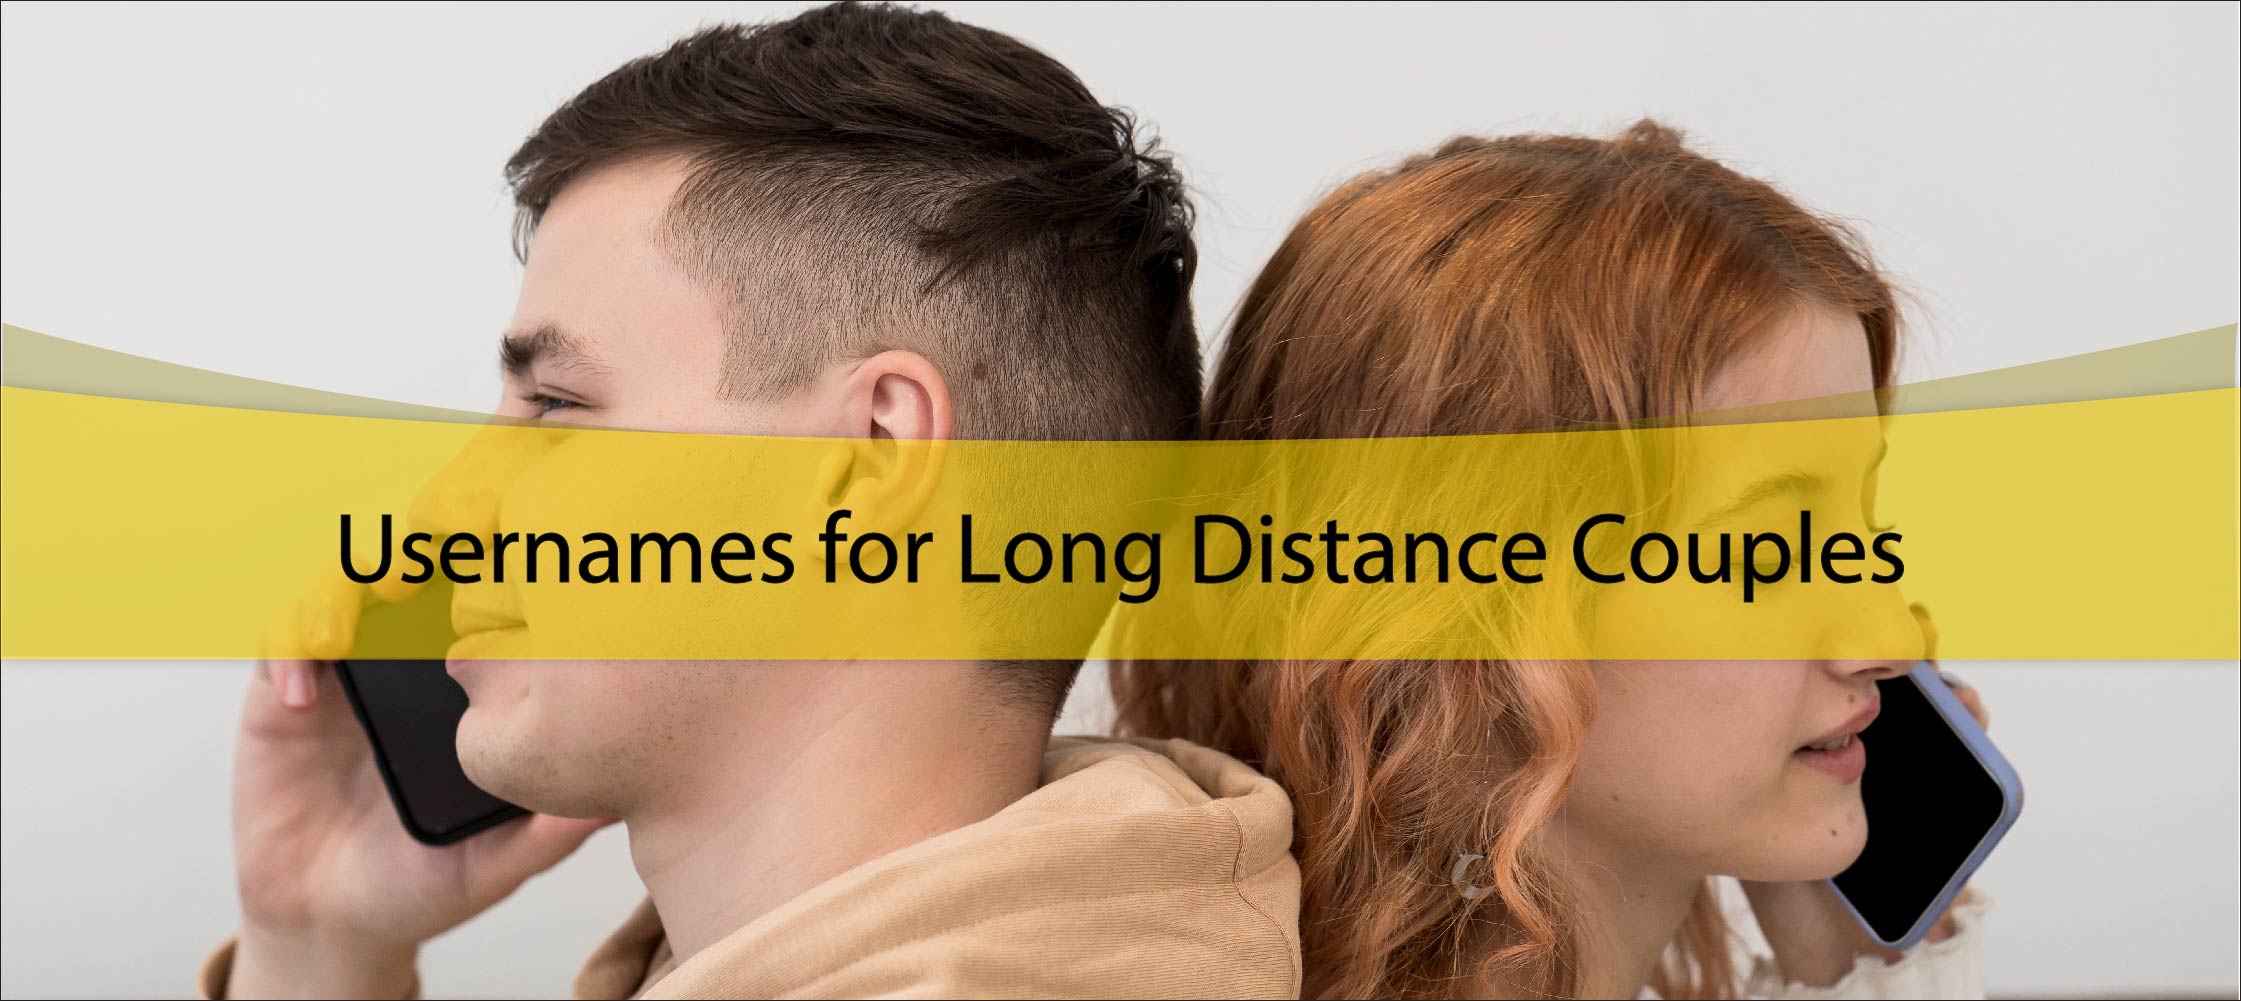 Usernames for Long Distance Couples